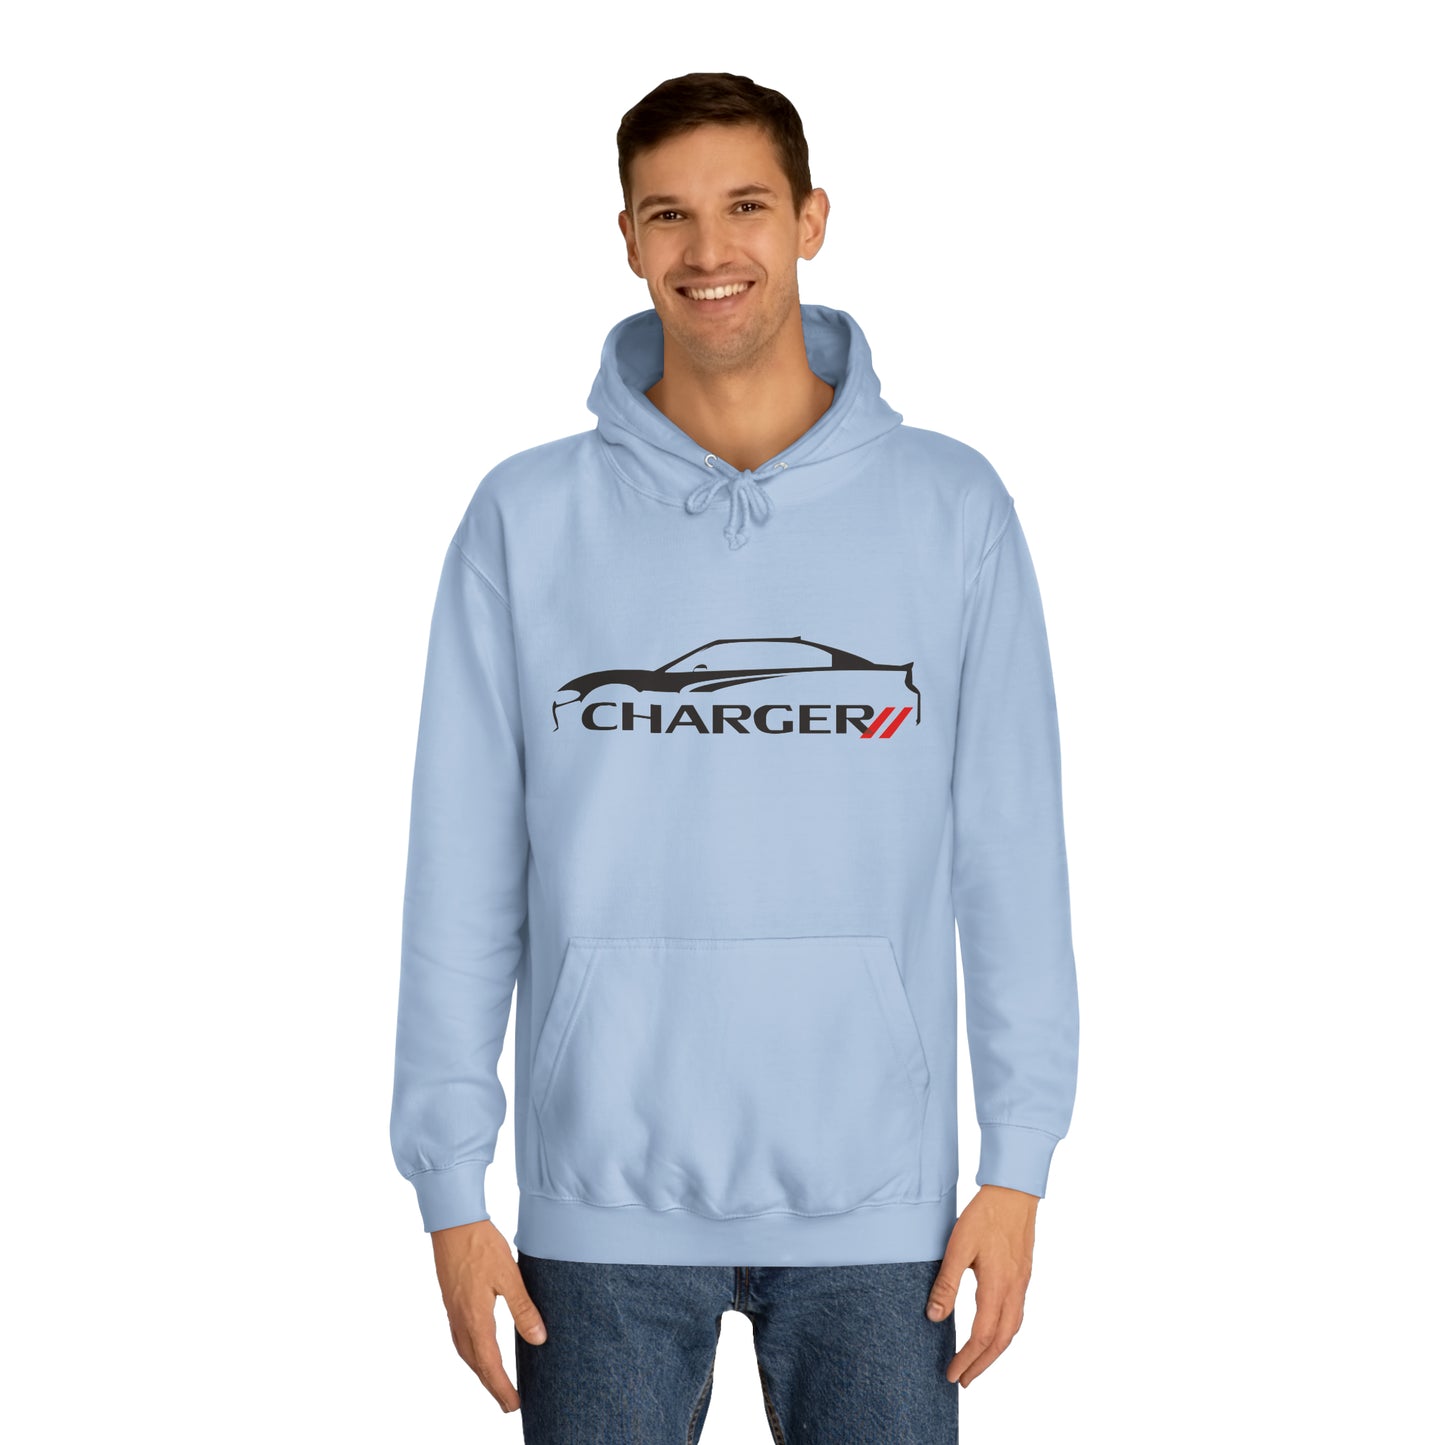 Charger Striped Fleece Hoodie